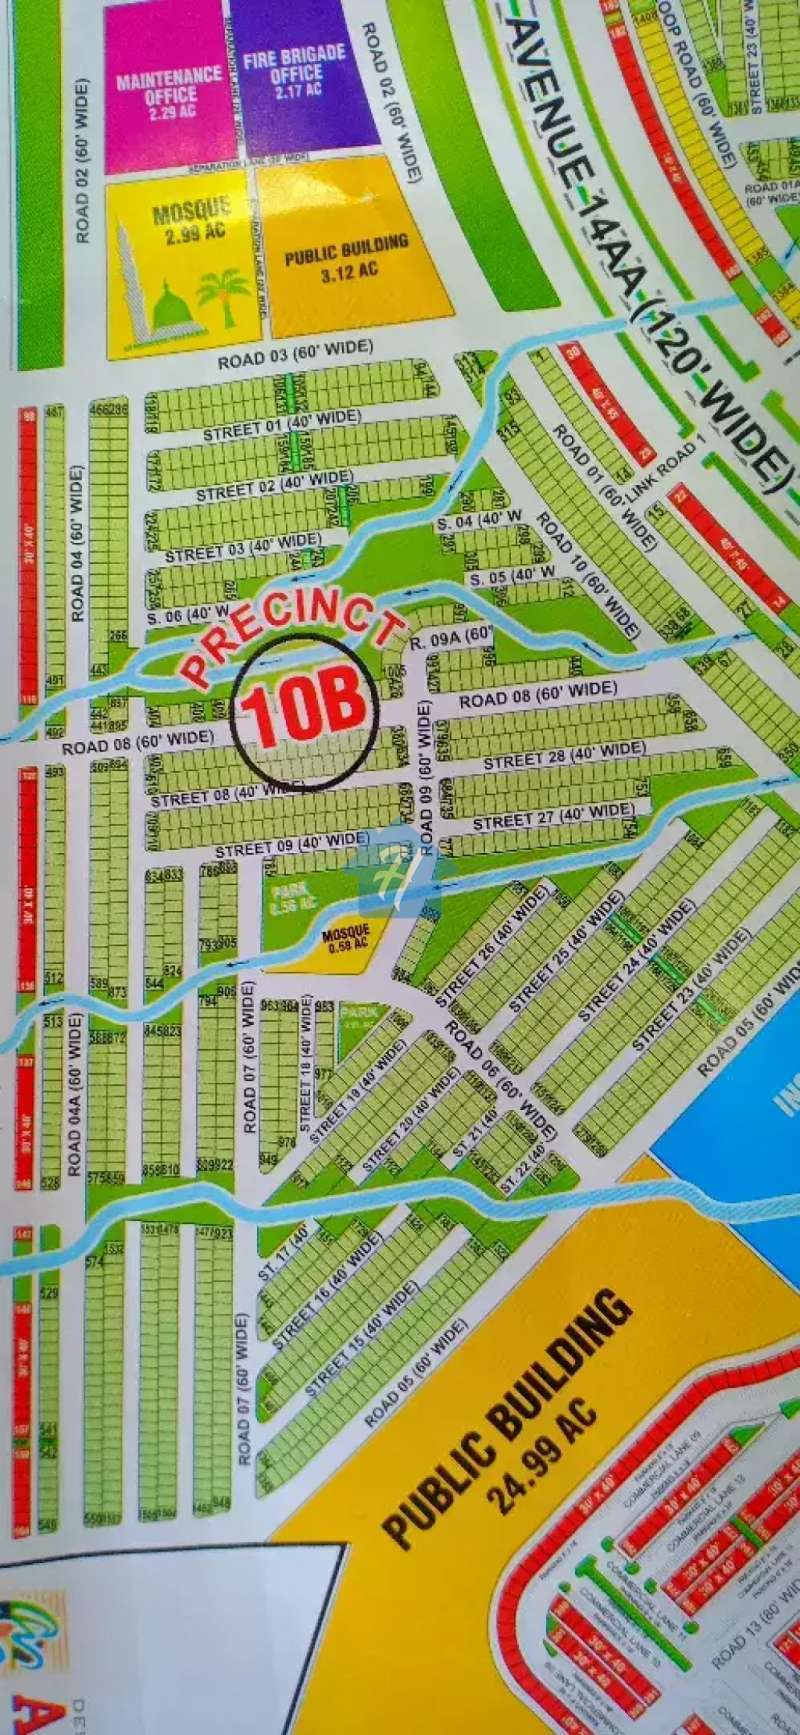 Precinct 10B plot available for sale all category